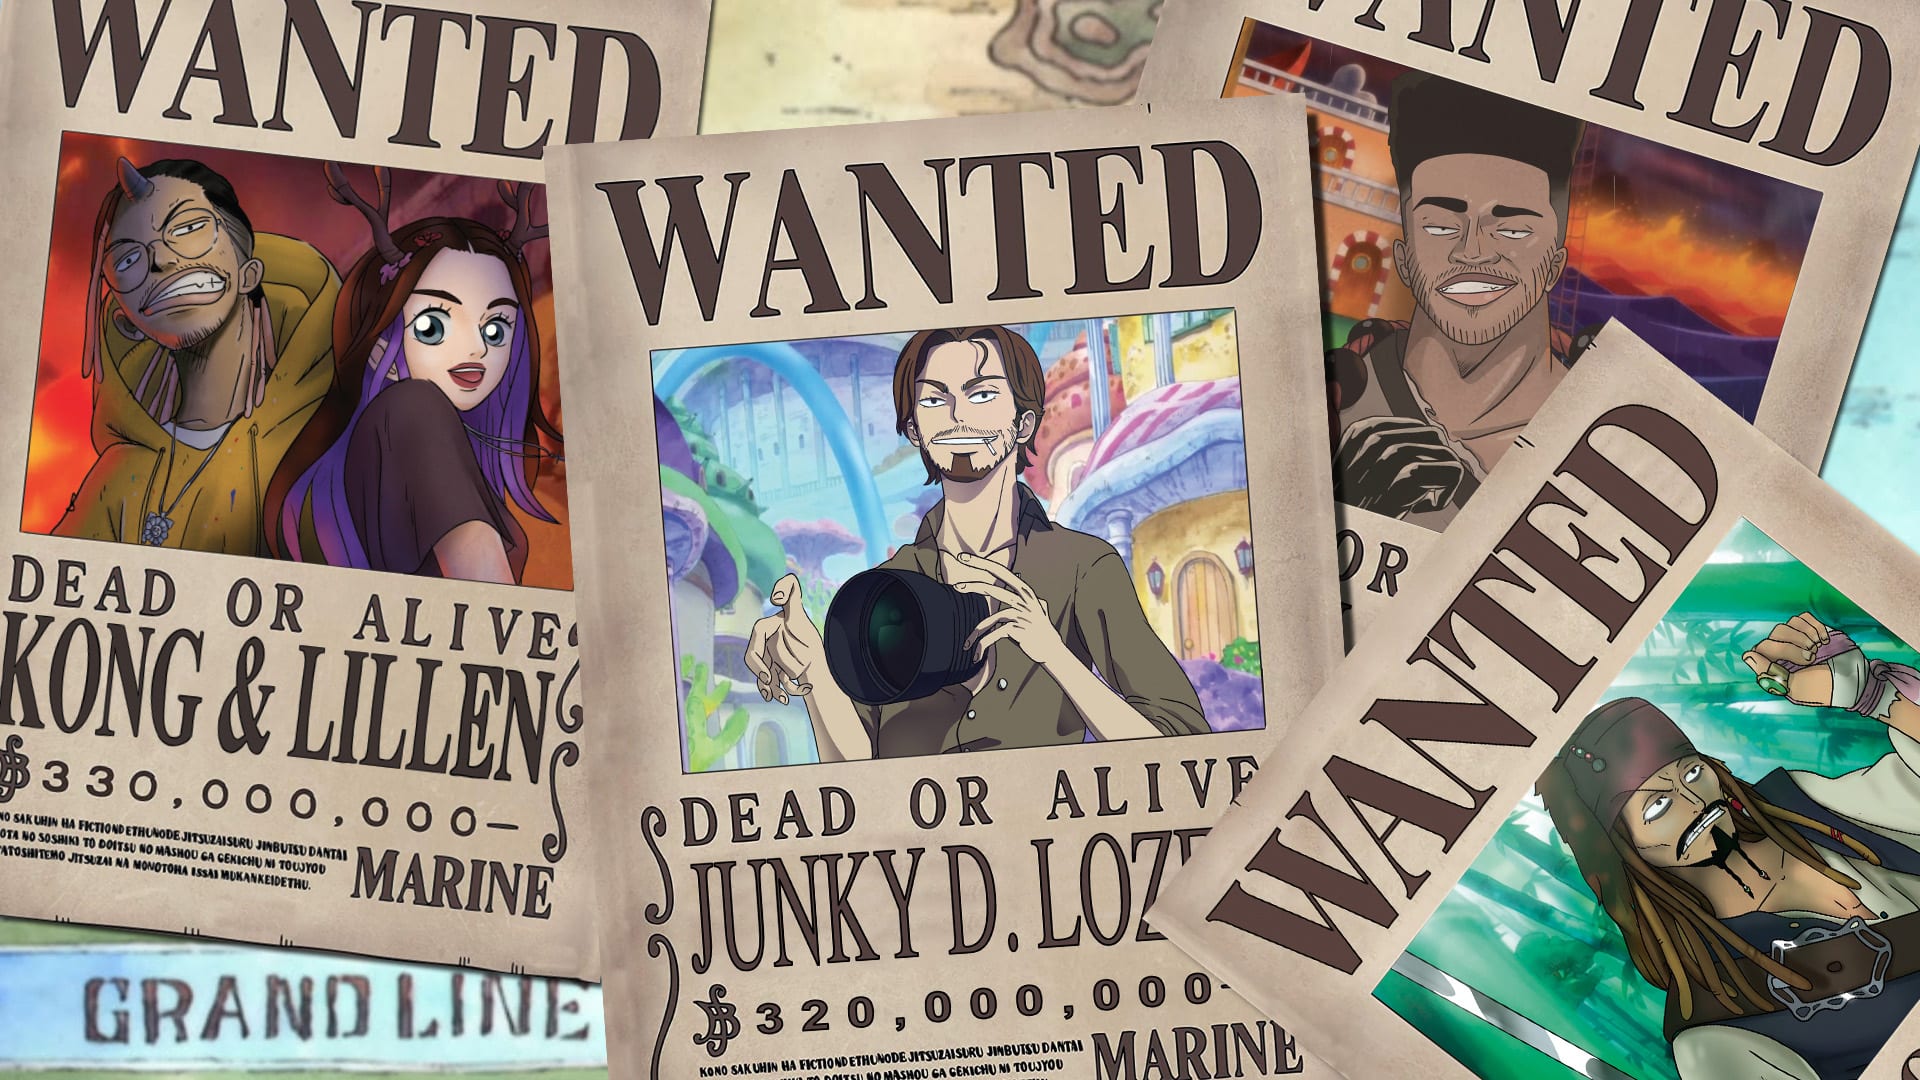 SHANKS bounty wanted poster one piece Jigsaw Puzzle by Shiro Vexel